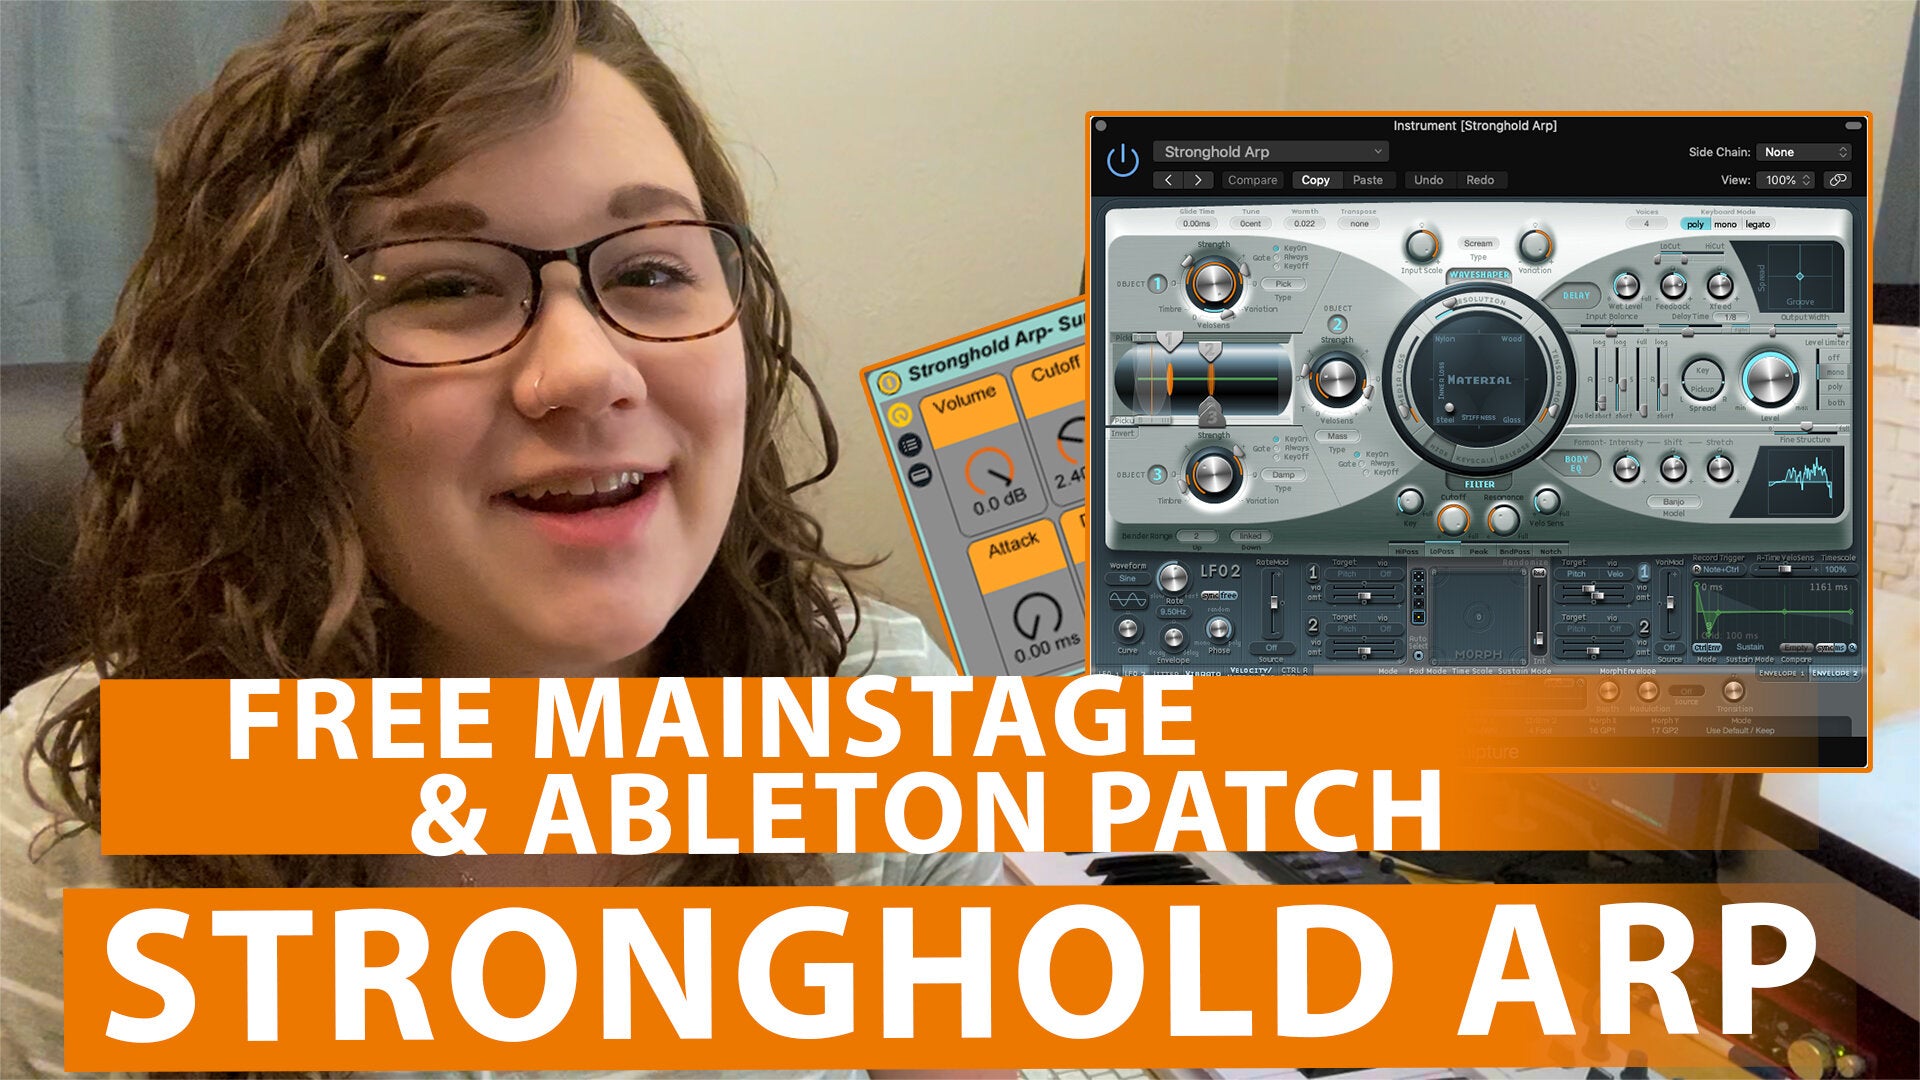 Free MainStage & Ableton Worship Patch! - StrongholdArp